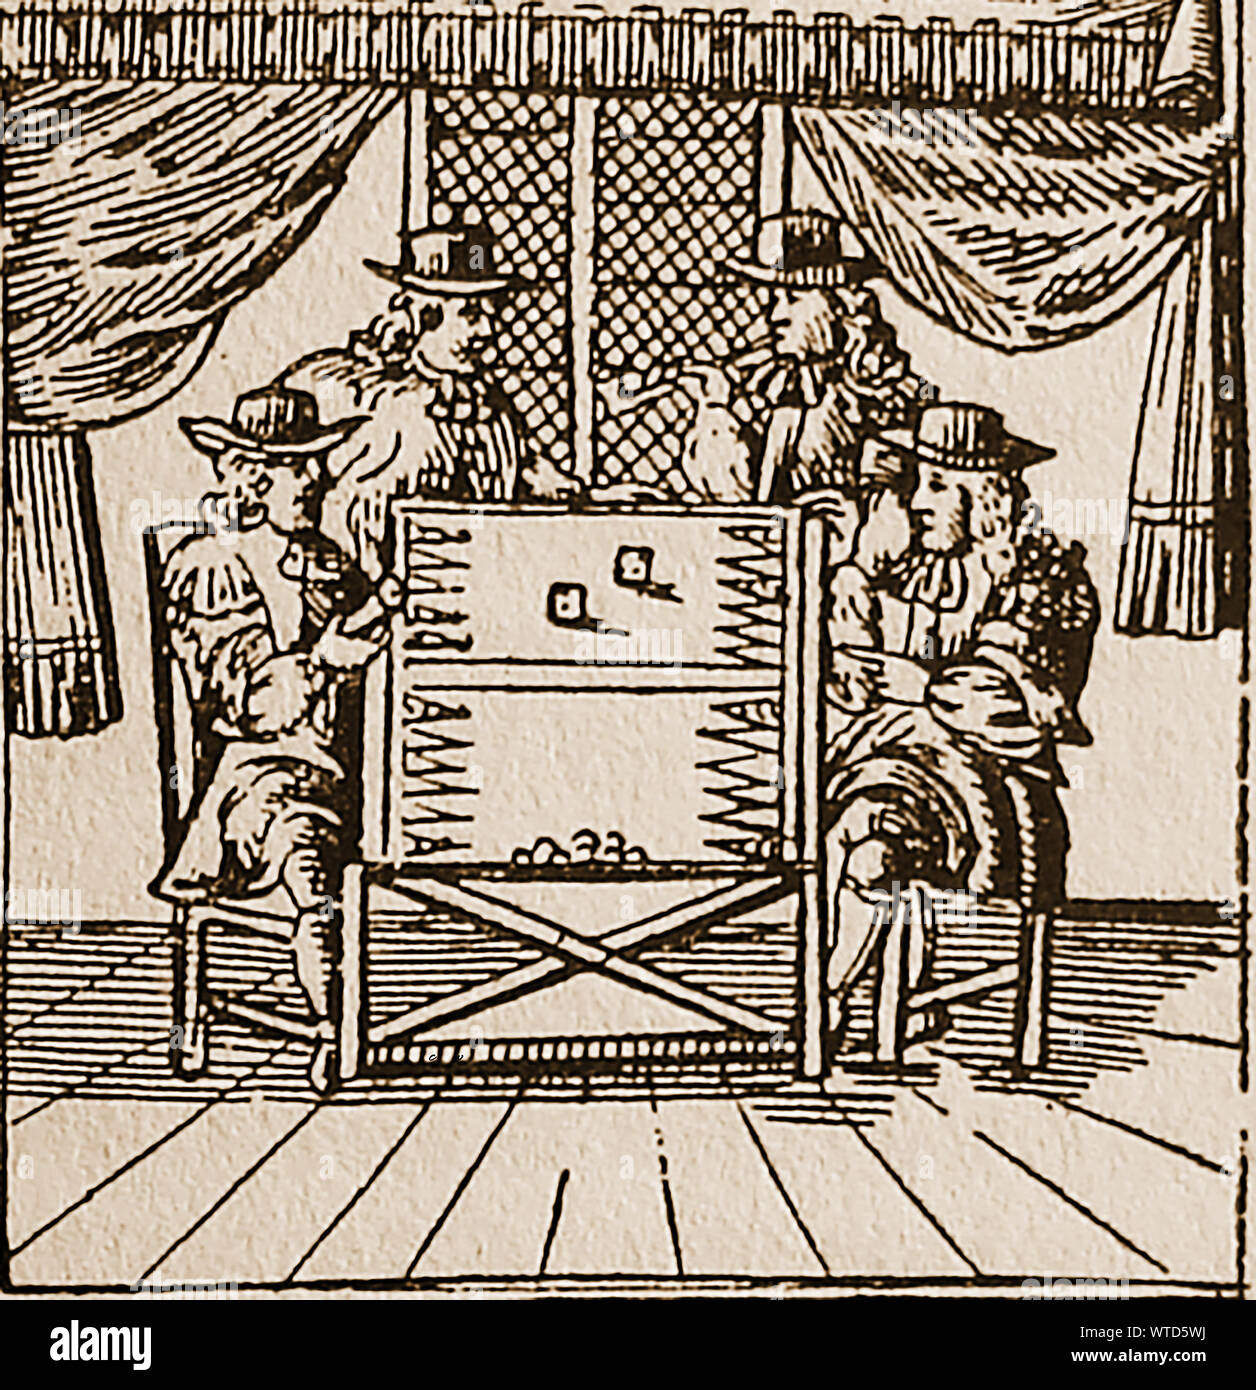 17th century games and pastimes  in Britain - A woodcut from the time showing four men playing backgammon. One is smoking a long pipe Stock Photo